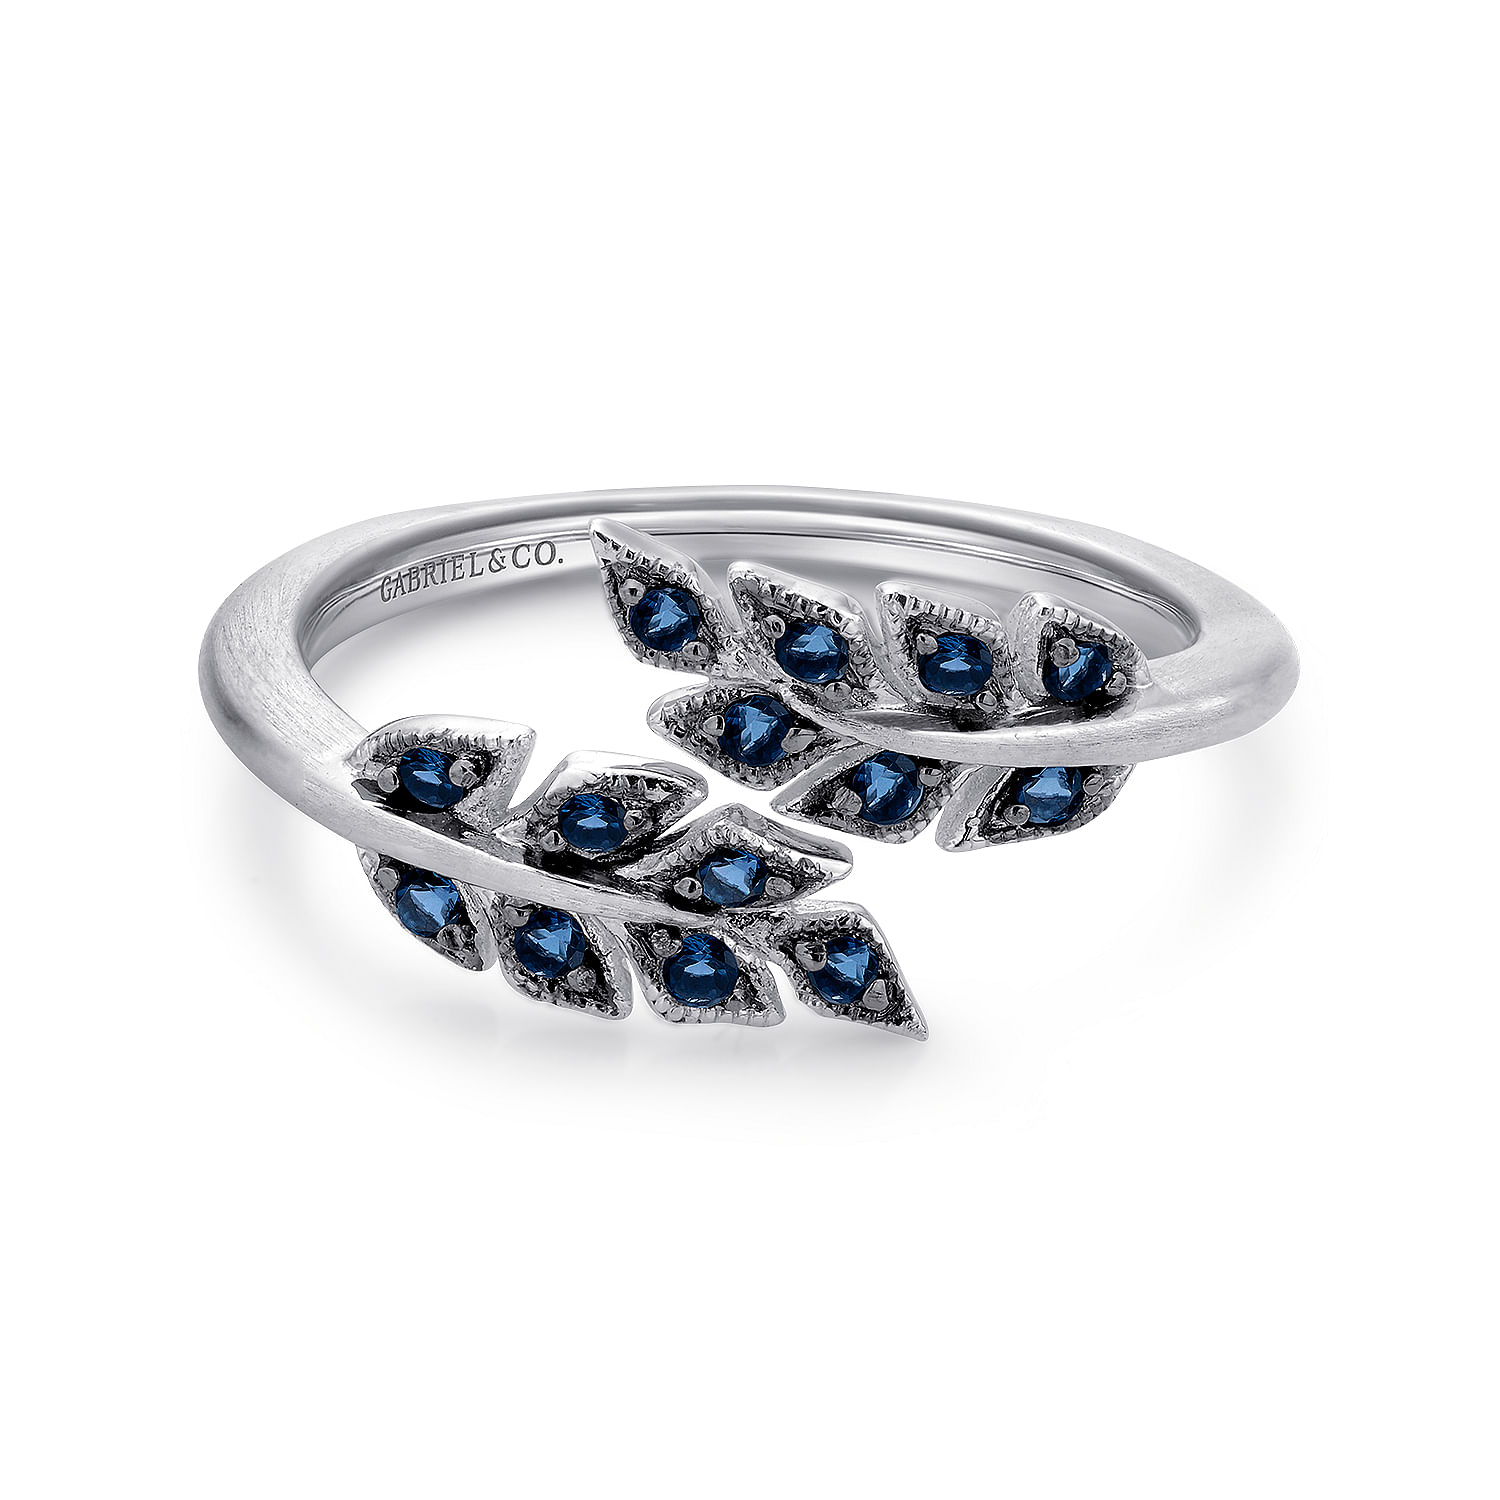 Sterling Silver Bypass Leaf Wrap Ring with Sapphire Stones With Brush Finish